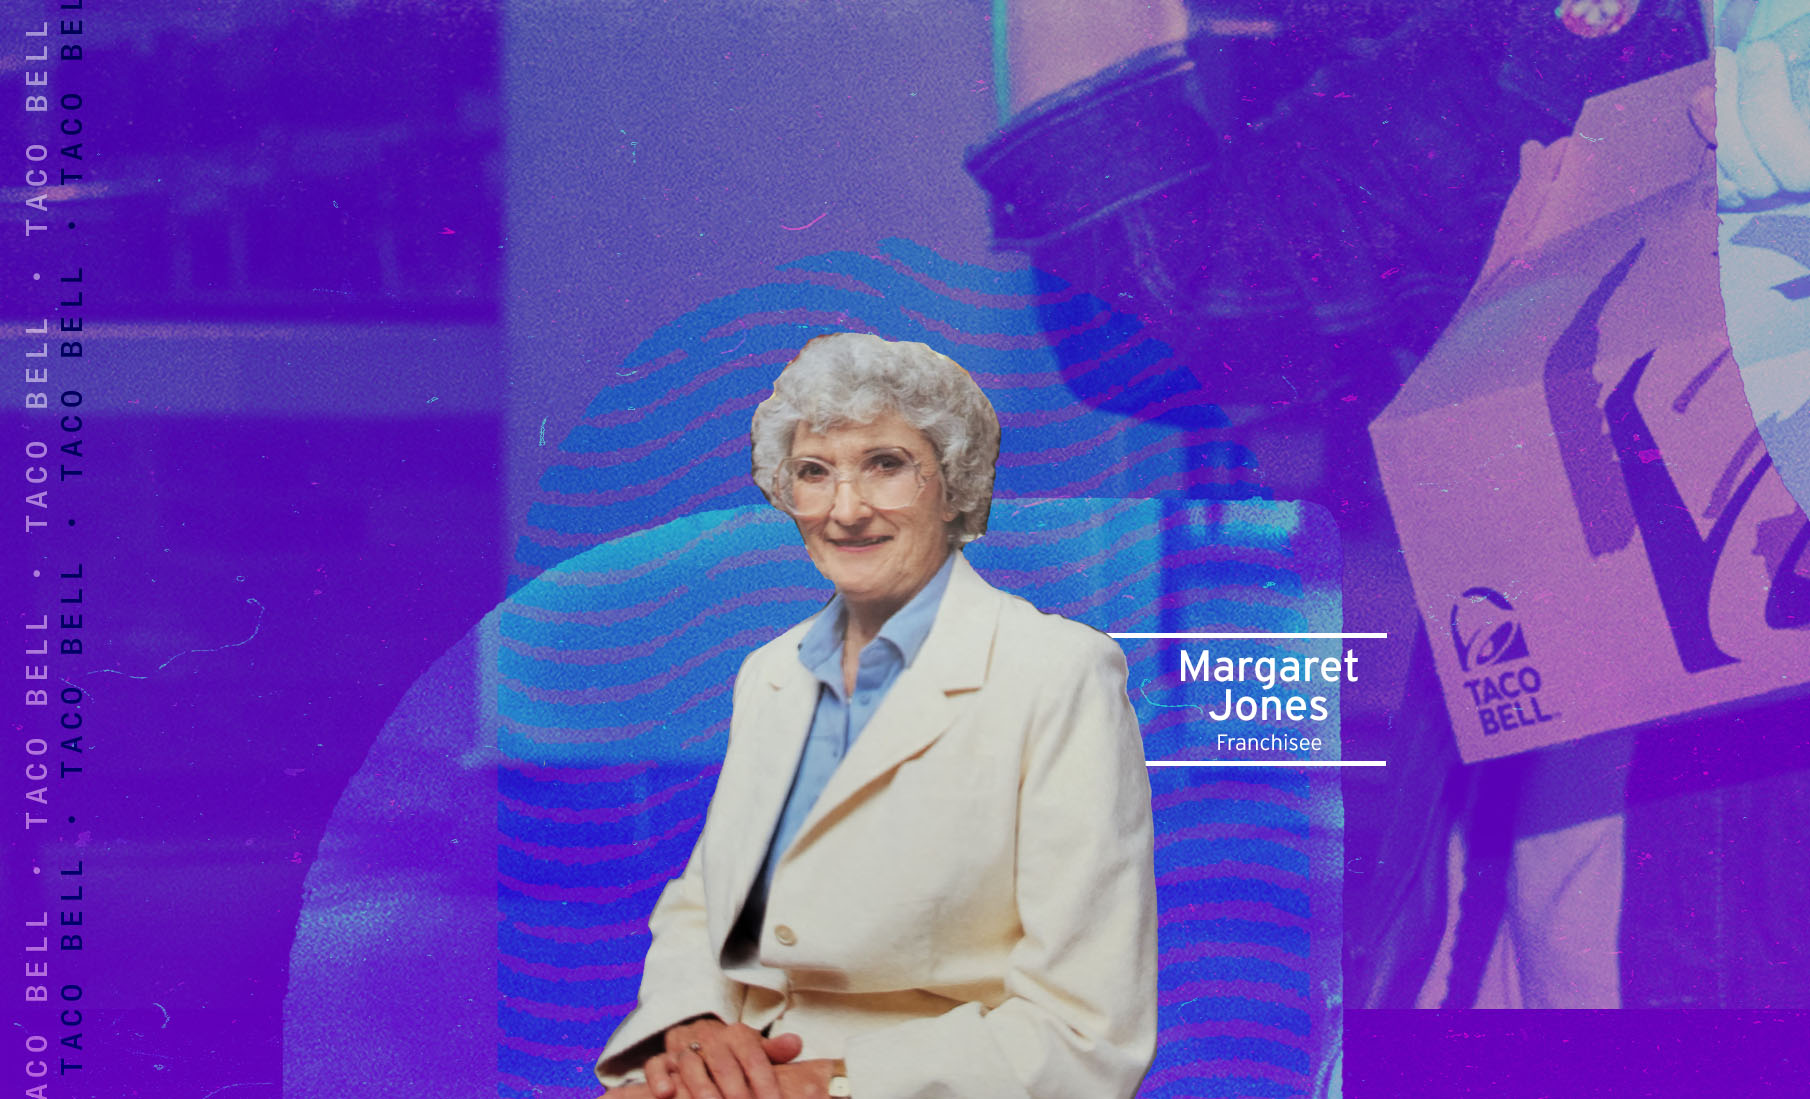 The Decision of a Lifetime: How Margaret Opened Doors Across QSR & Broke Glass Ceilings